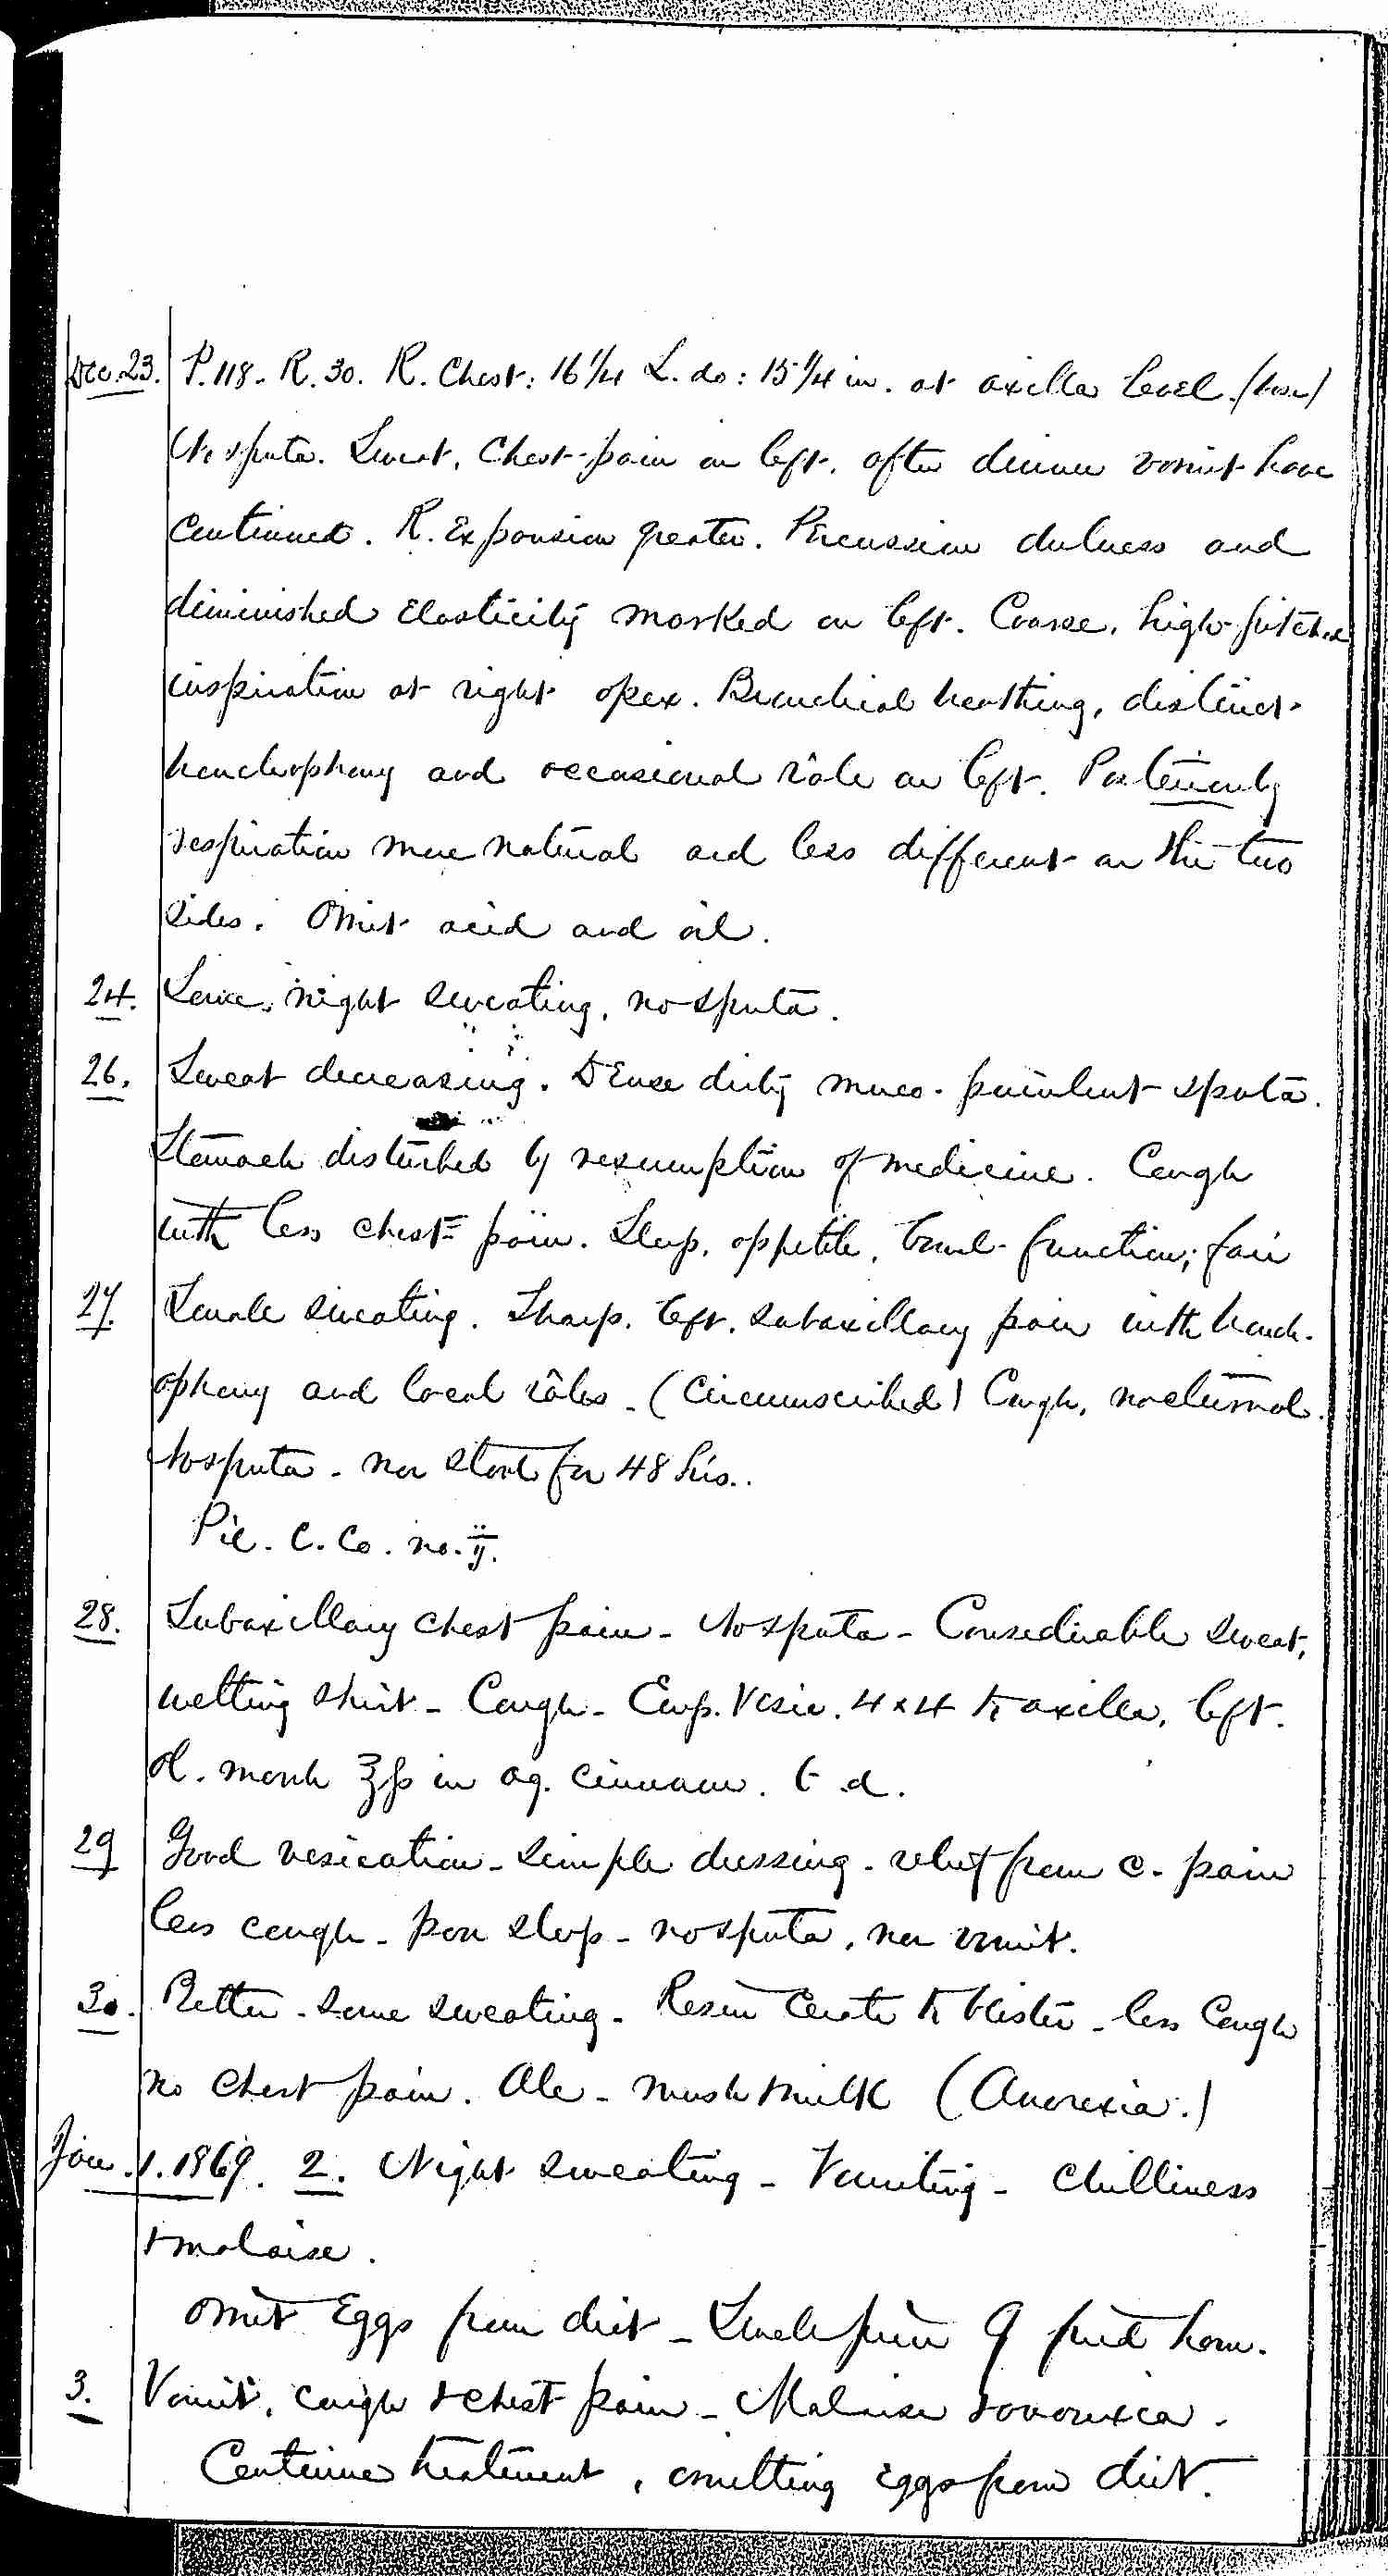 Entry for Richard Forn (page 11 of 21) in the log Hospital Tickets and Case Papers - Naval Hospital - Washington, D.C. - 1868-69